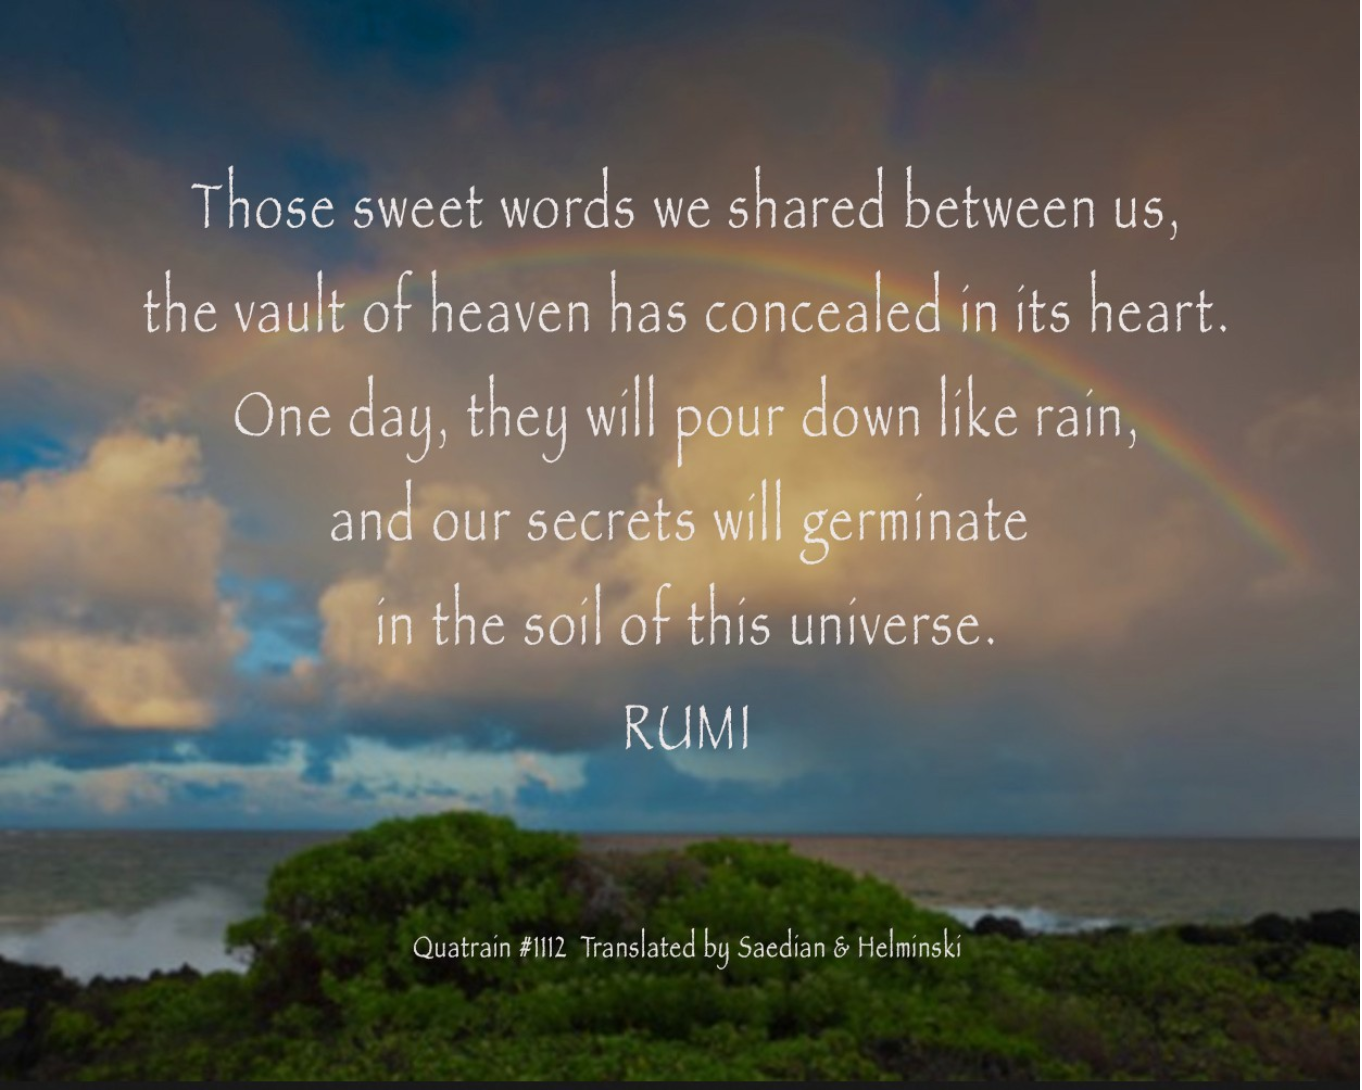 Understanding Rumi… The “Person of Heart” Is the All.